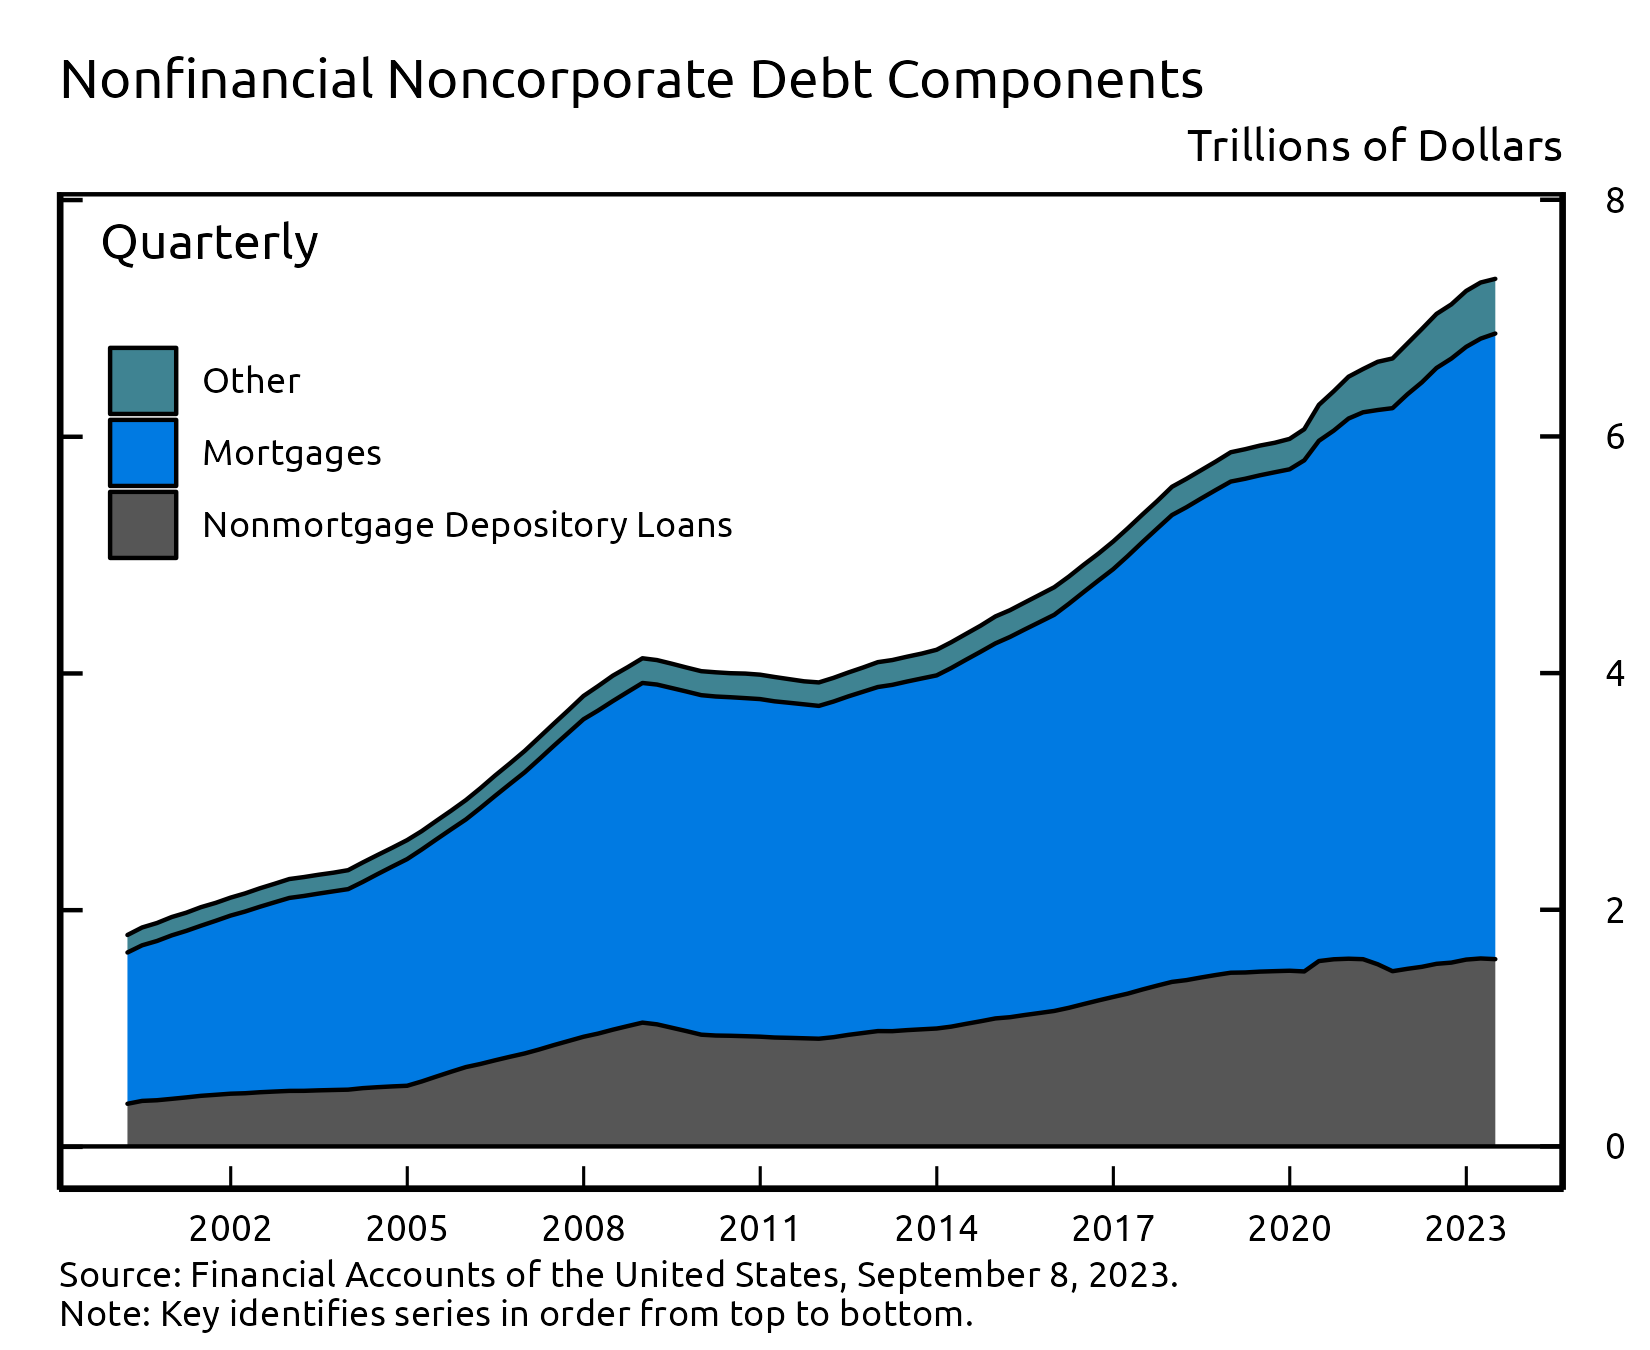 A stacked area chart showing total debt of US nonfinancial sectors as a share of GDP over time, with separate areas for component sectors. Time is plotted along the horizontal axis and dollars are plotted on the vertical axis